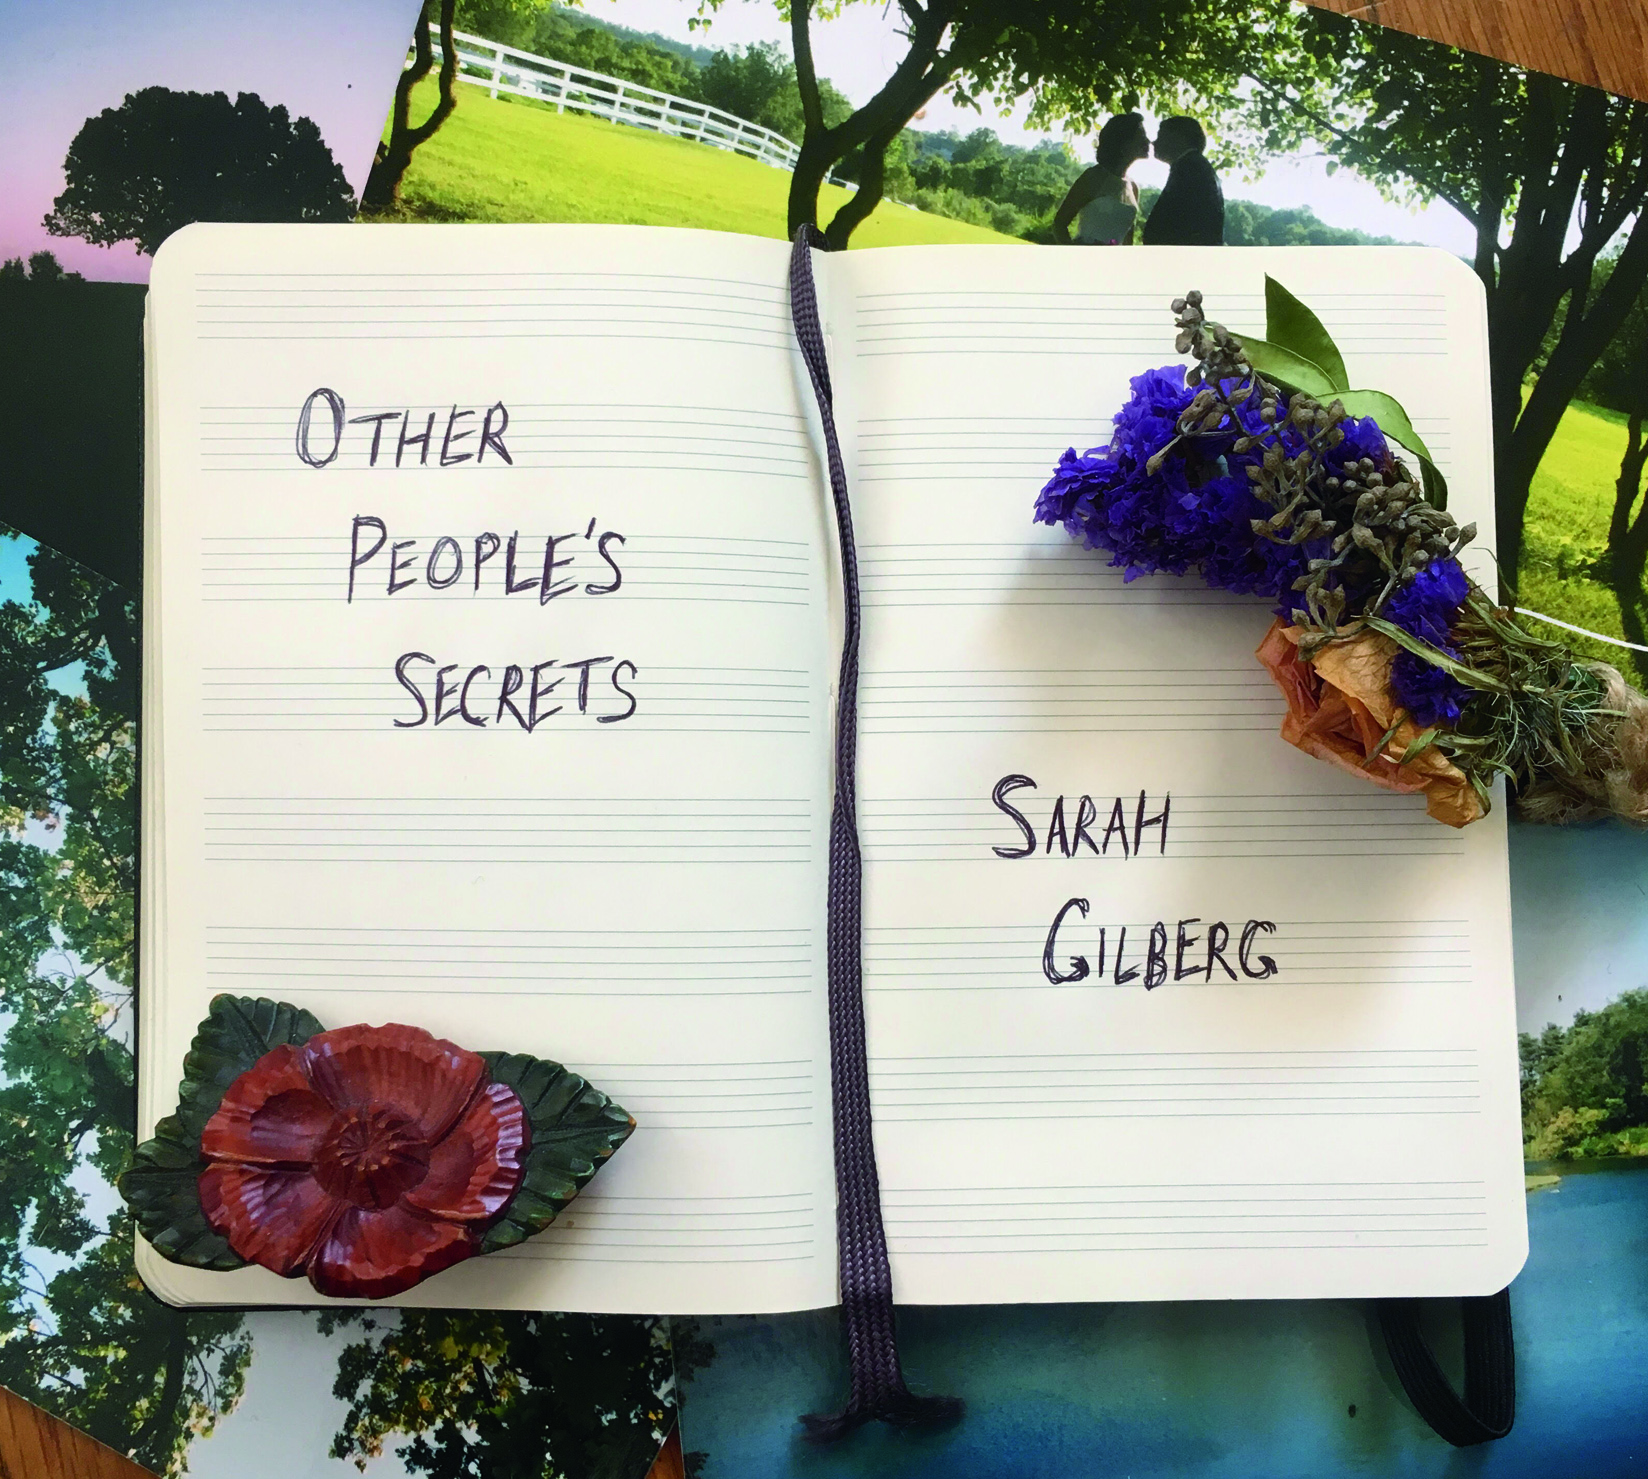 Sarah Gilberg - Other People's Secrets album cover